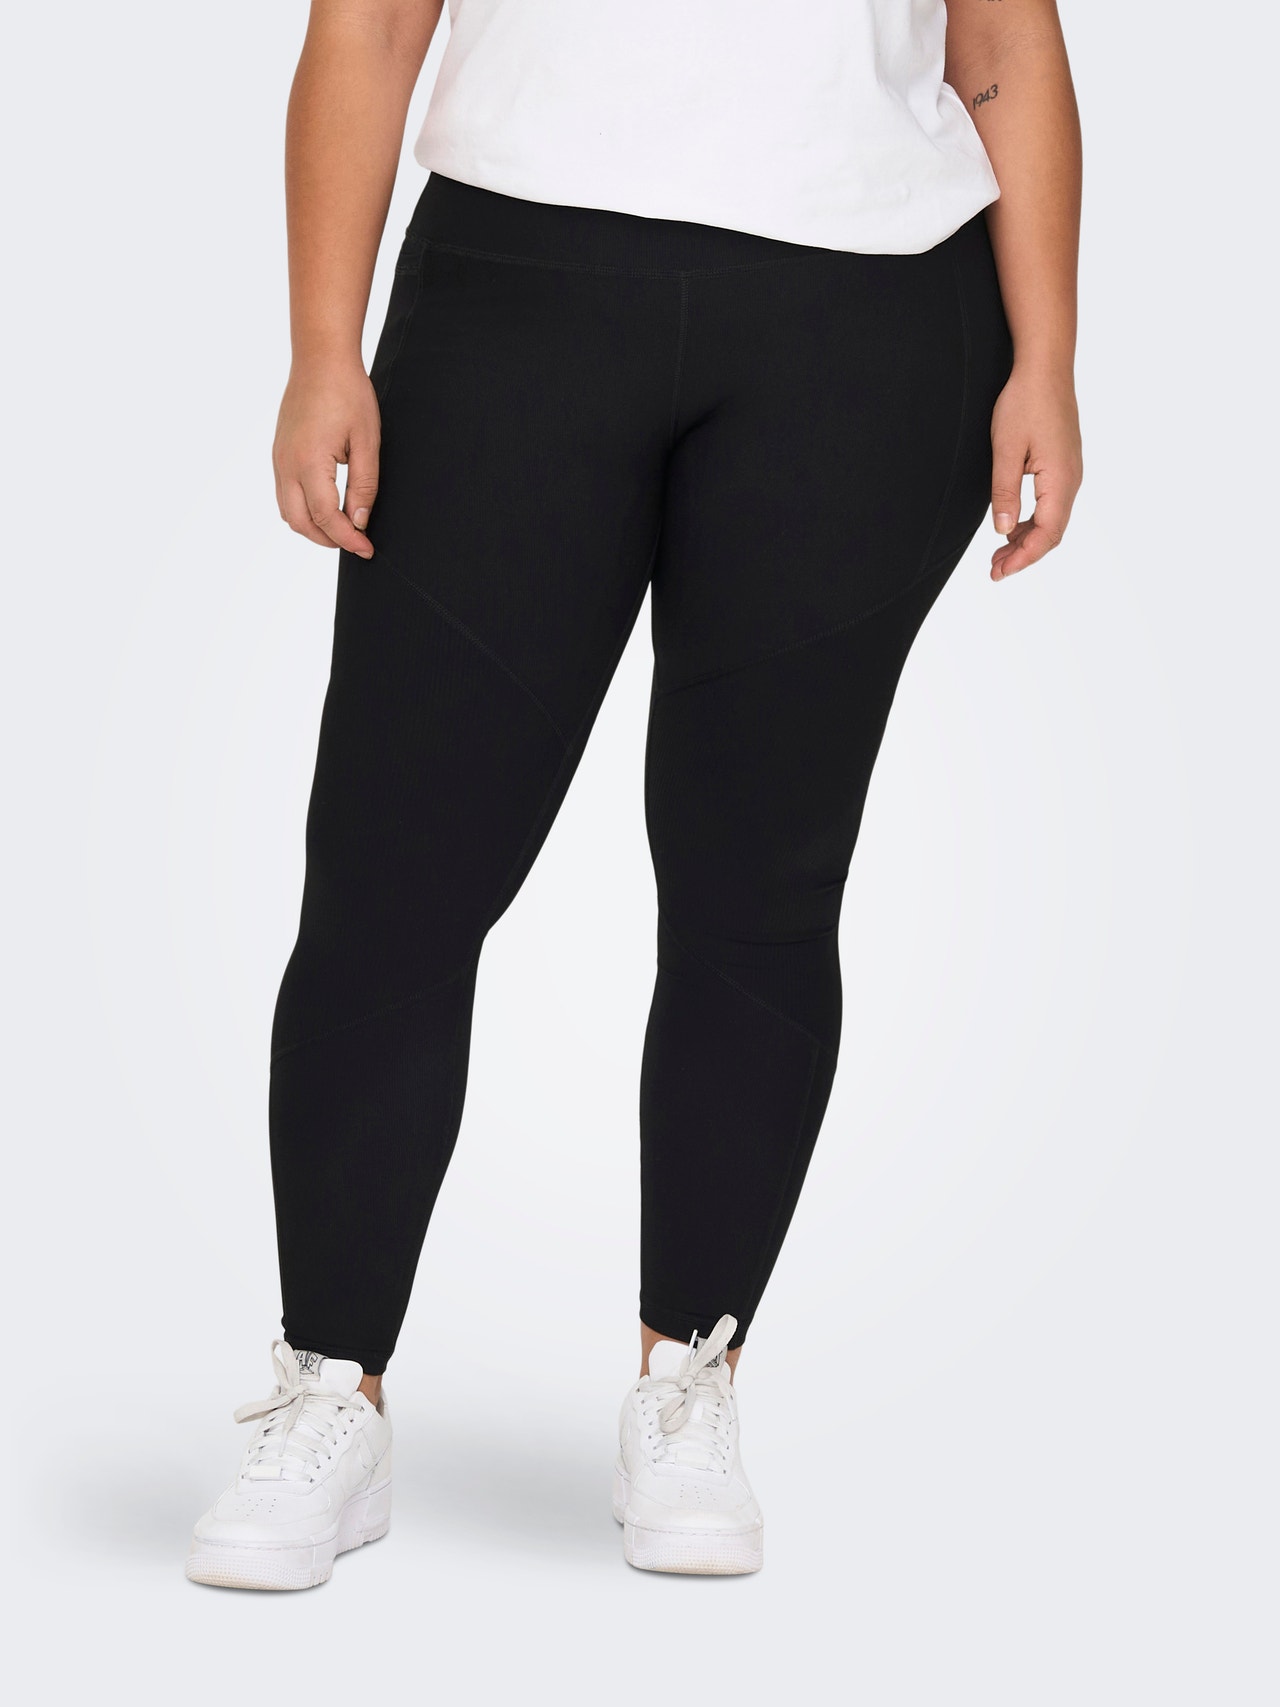 ONLY Tight fit High waist Curve Legging -Black - 15276824